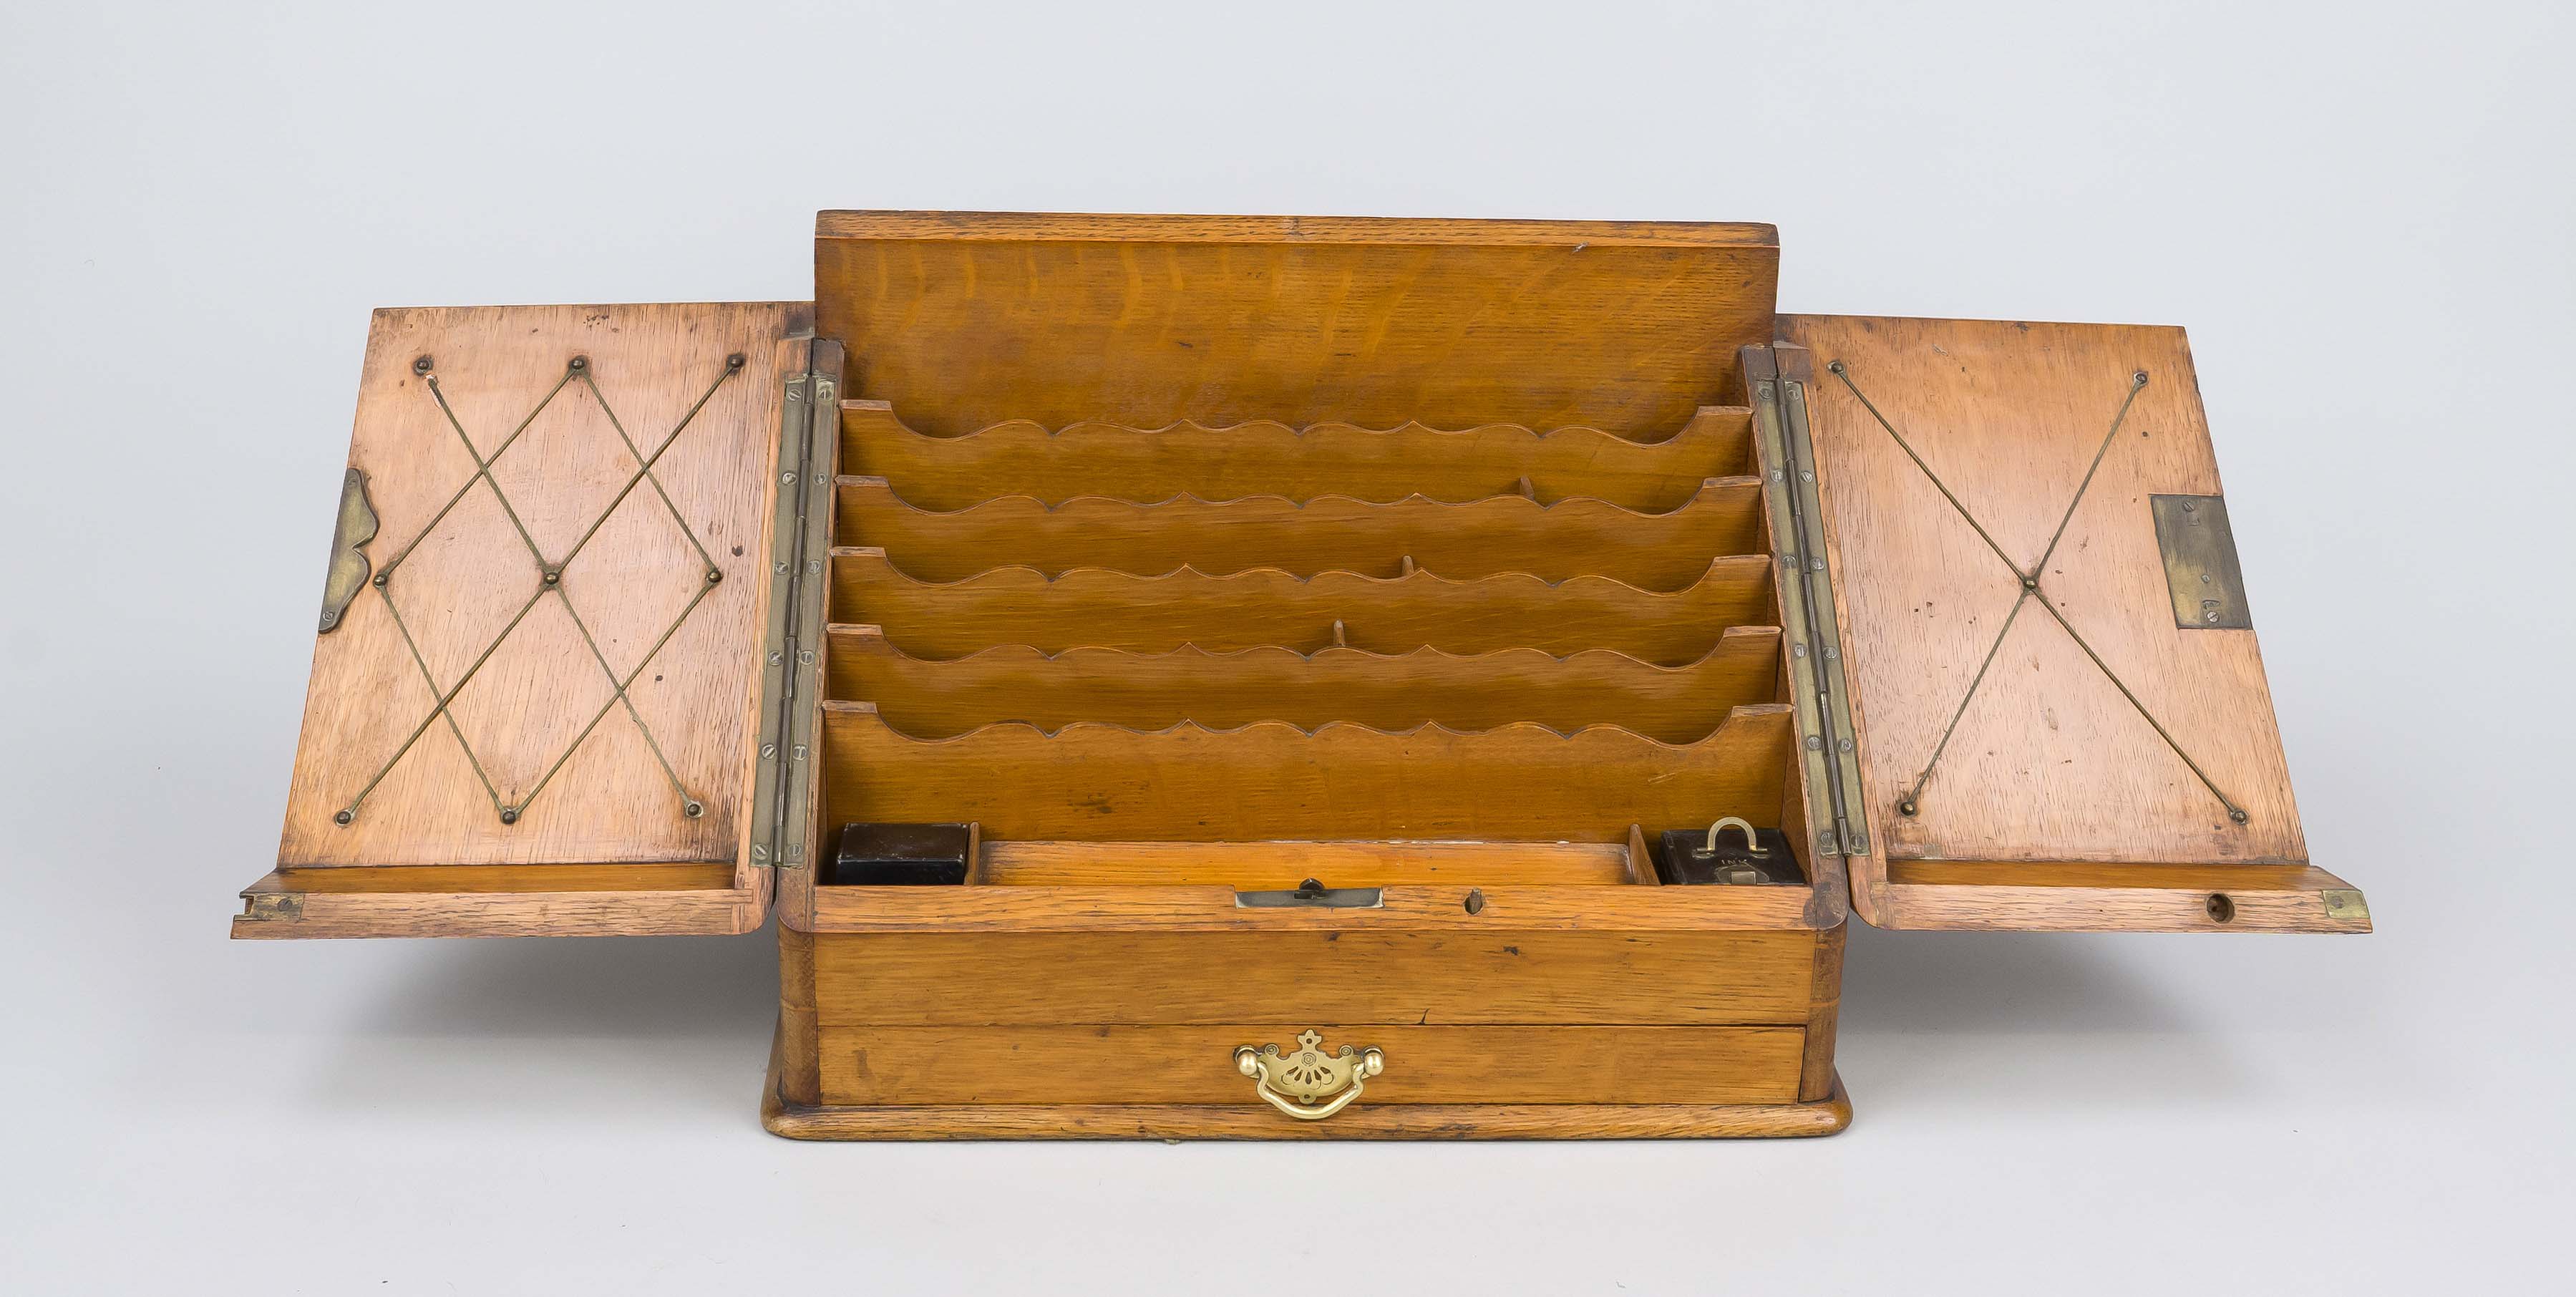 Travel secretary, late 19th century, oak body with brass fittings. Sloping front with hinged door, - Image 2 of 2